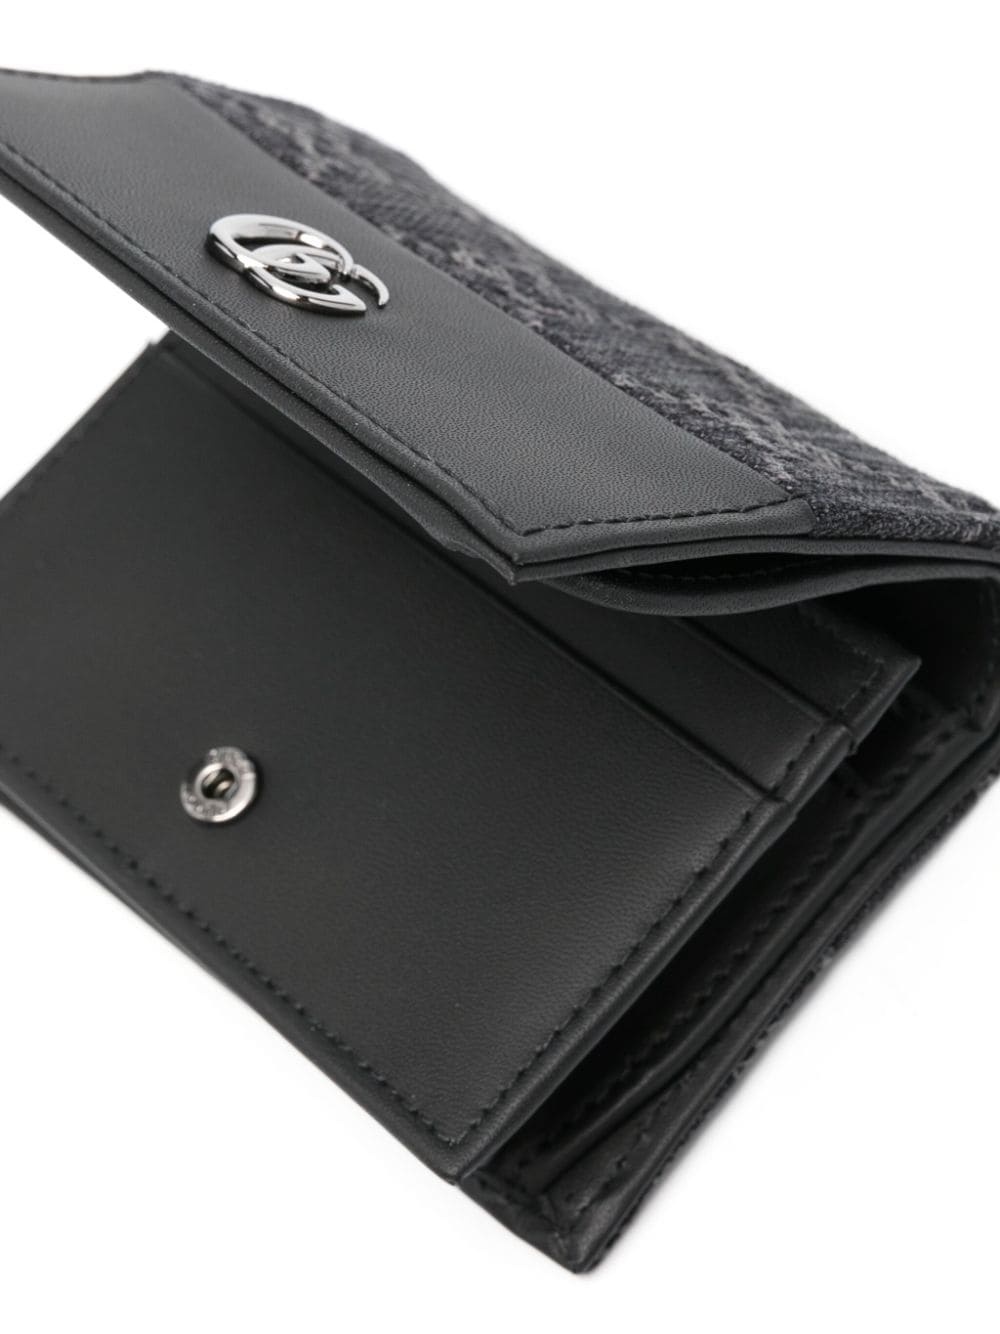 GG-supreme leather wallet - 3